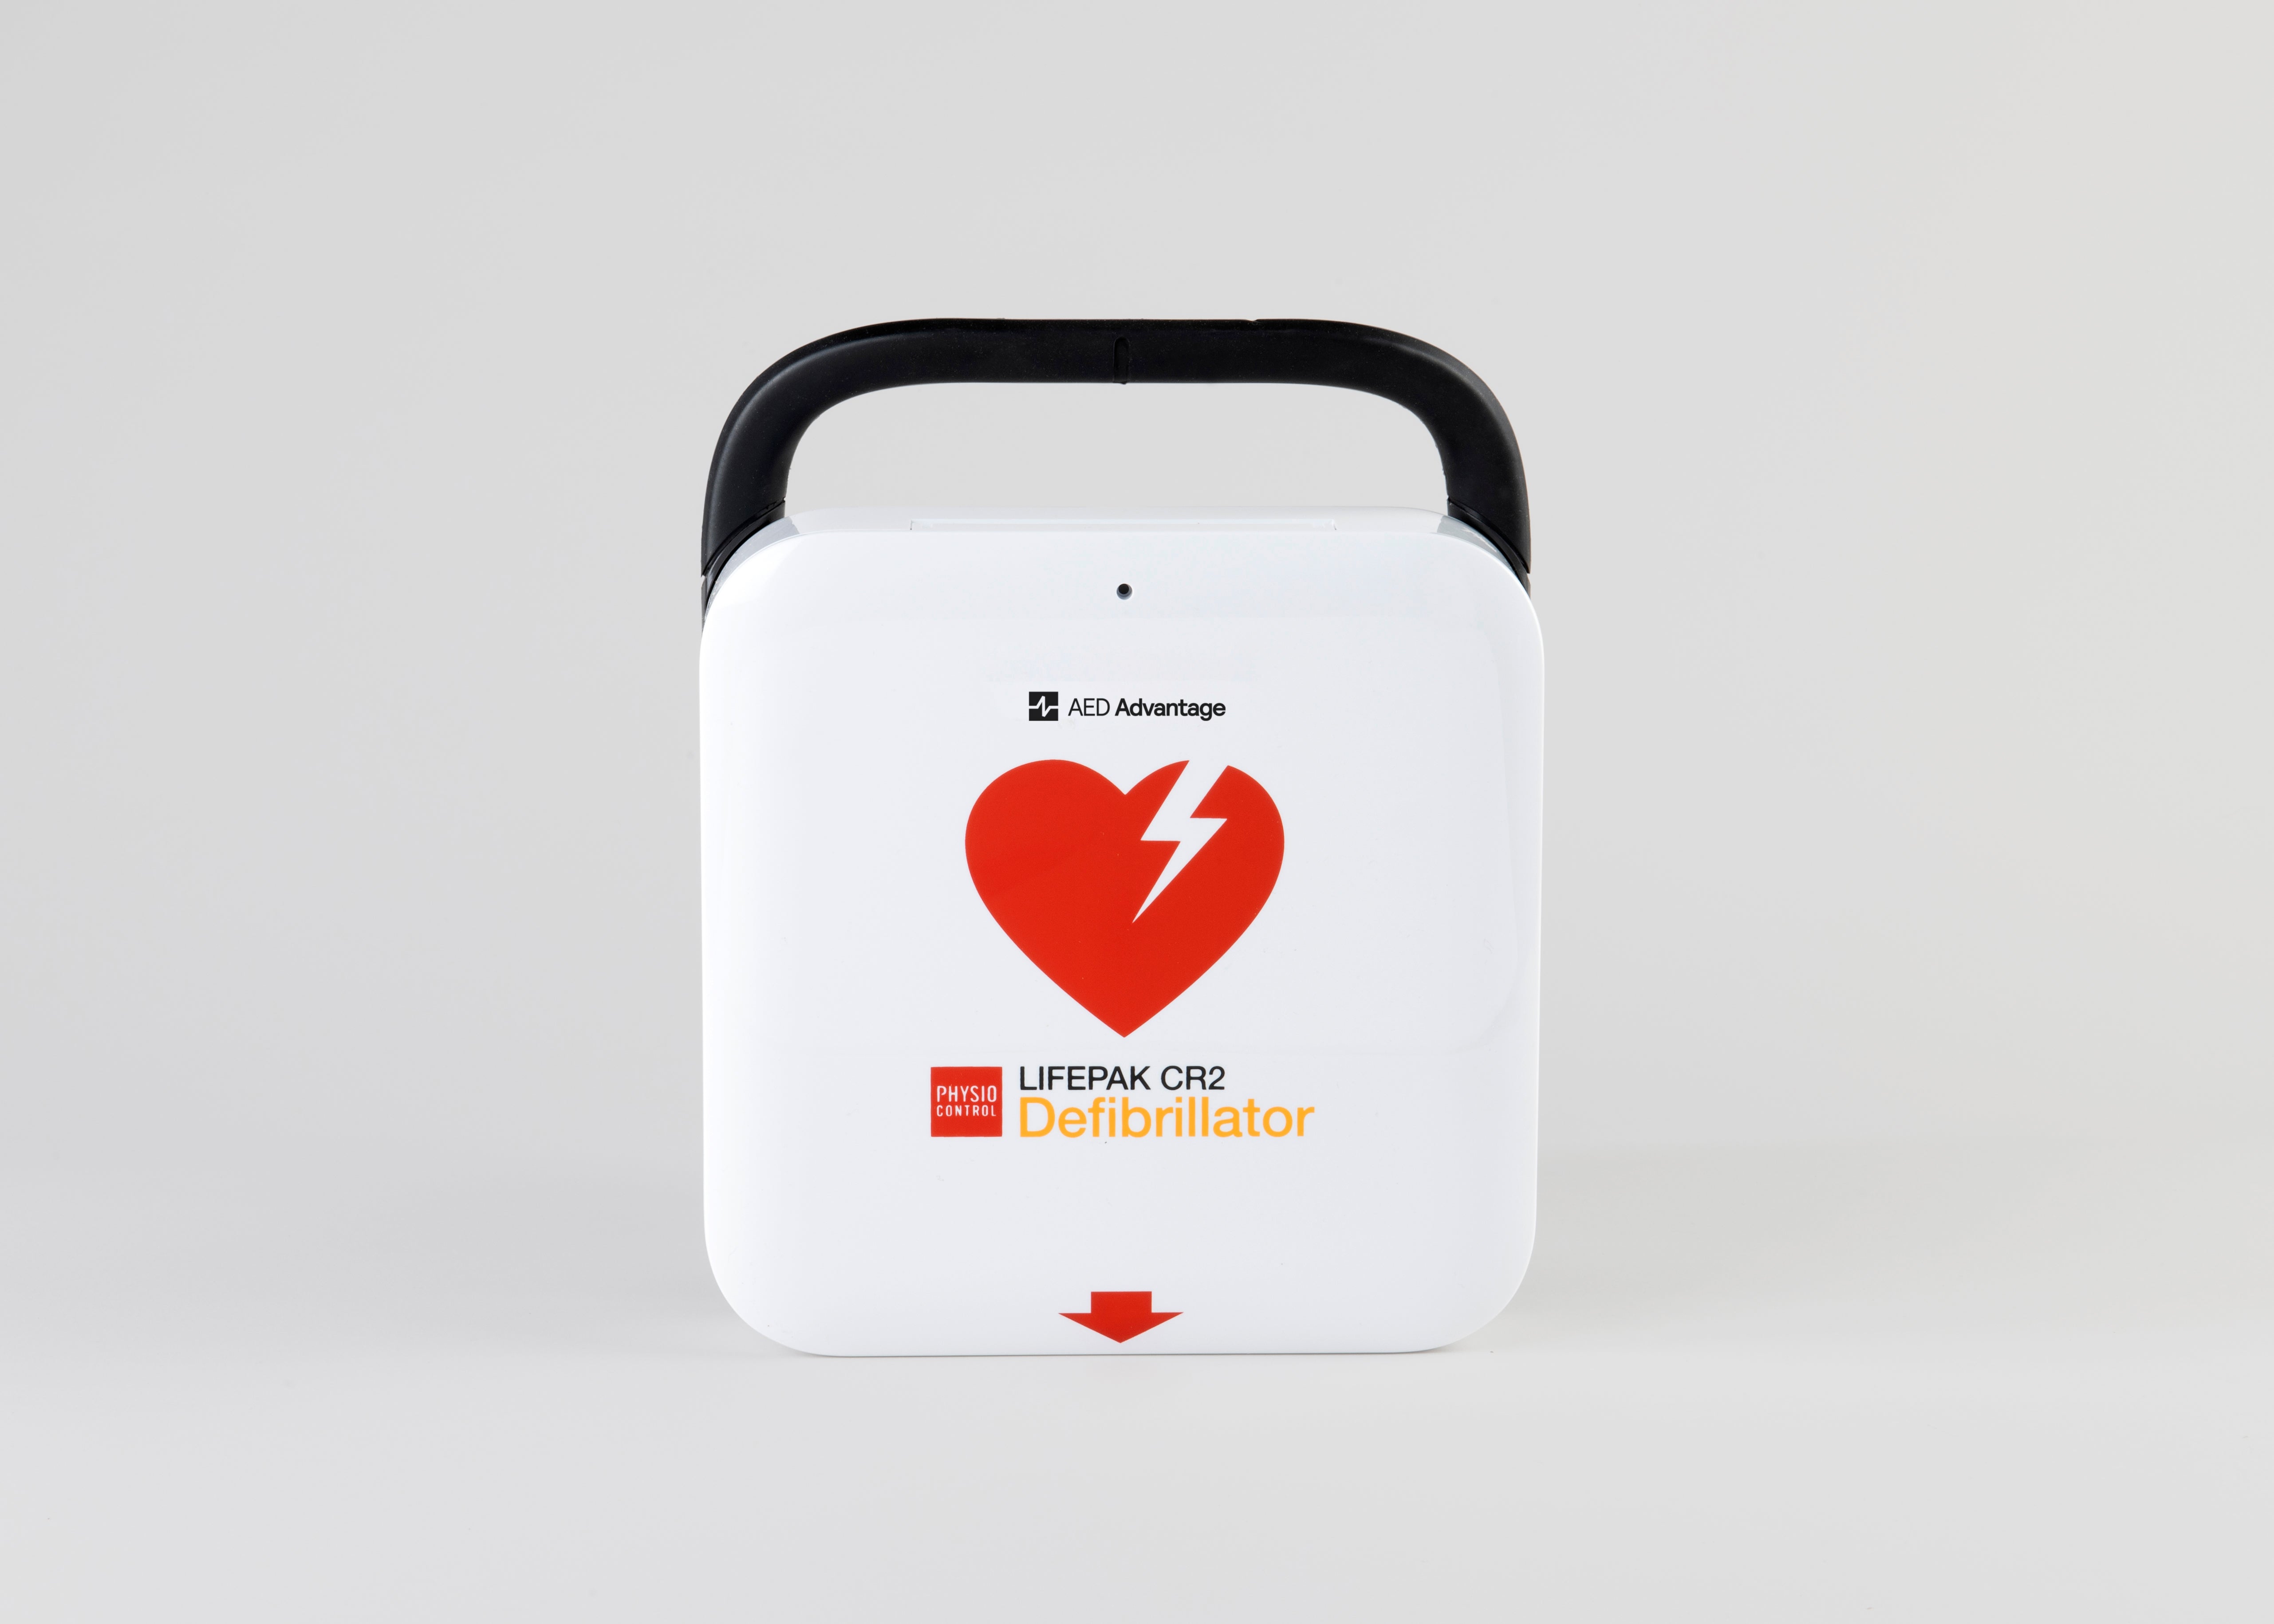 A white and red lifepak cr2 defibrillator with a black handle.